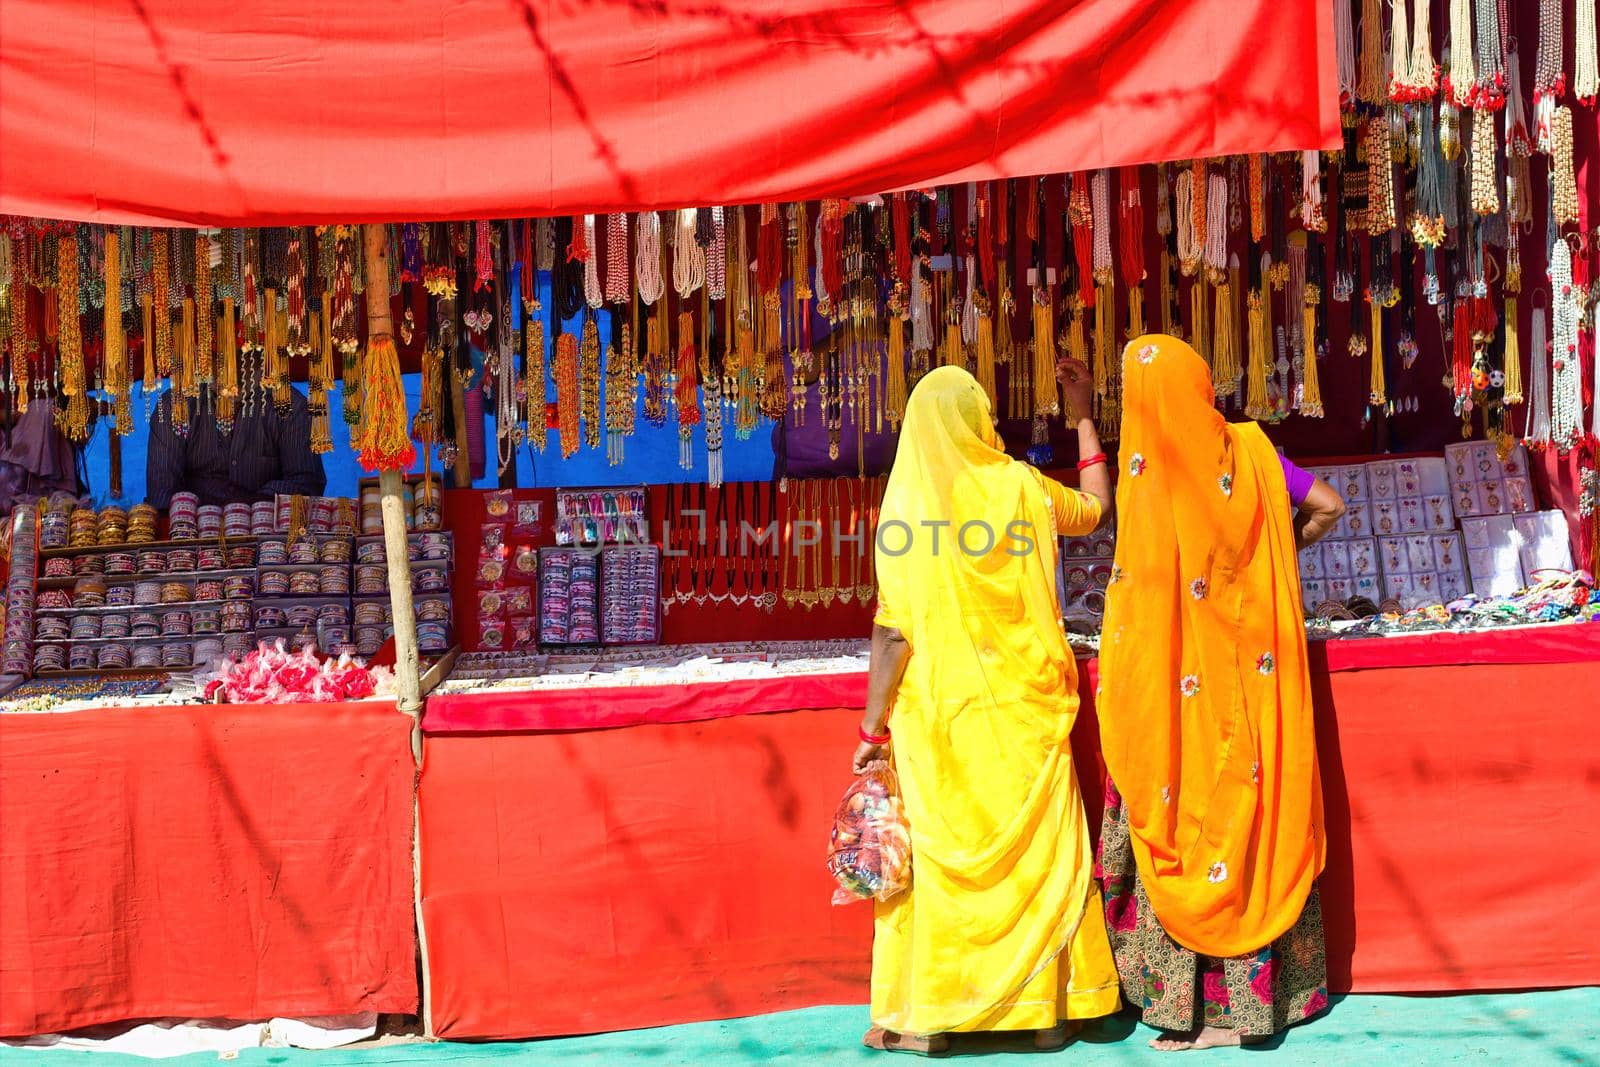 Couple of unidentified women in traditional hindu wear saree buying or shopping jewelery items in the commercial street of Pushkar fair in state of Rajasthan, India. Colorful Indian culture concept